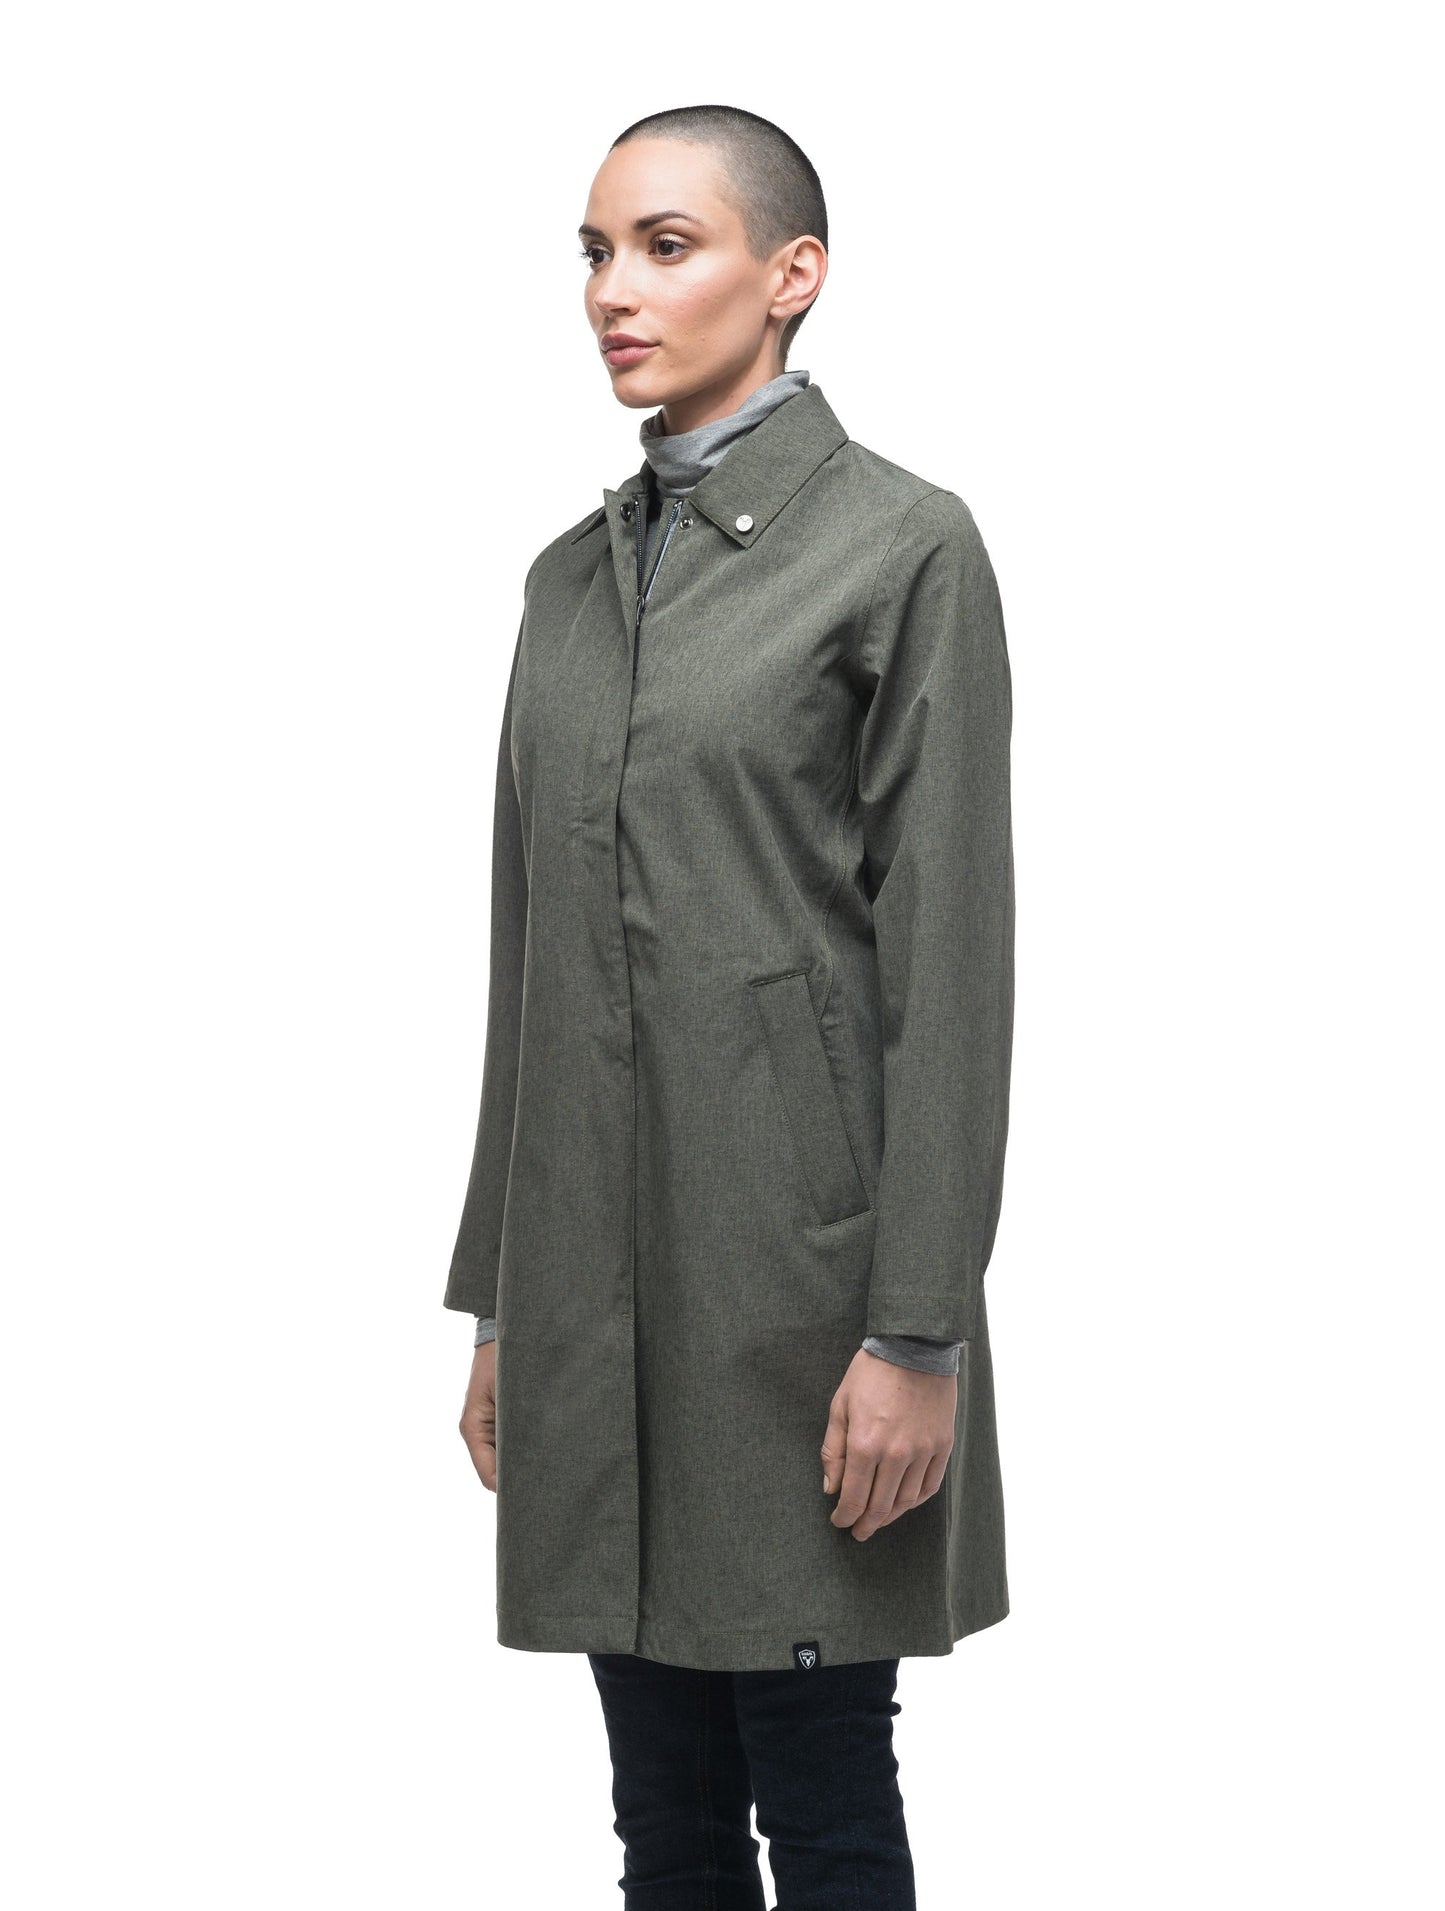 Women's thigh length collared rain jacket in Army Green